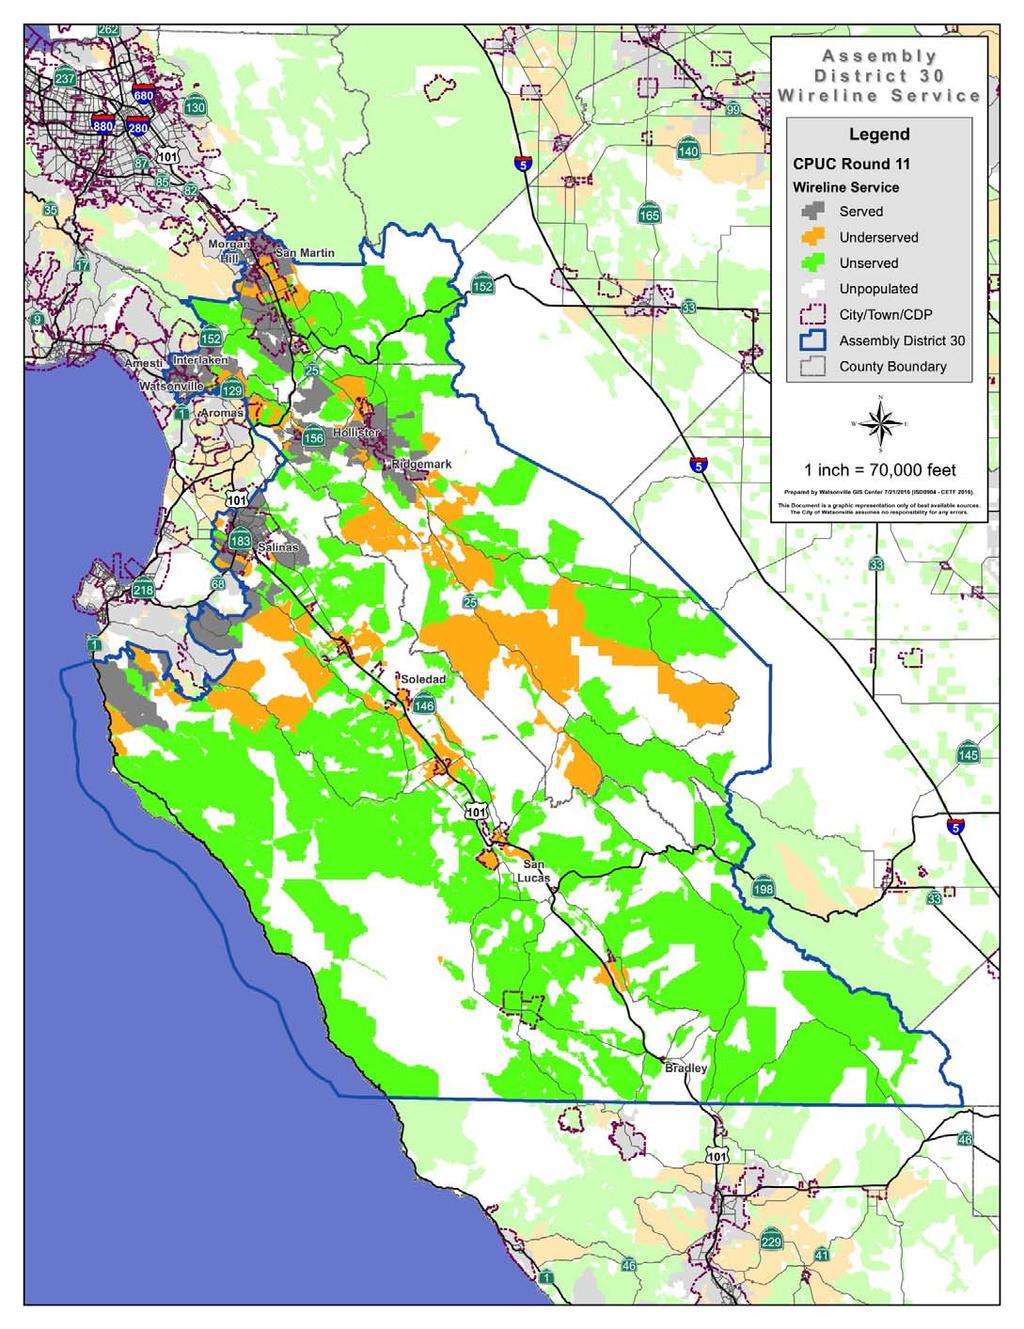 The Digital Divide In Assembly District 30: Broadband Wireline Service District 30 Served Underserved Unserved Total Households 107,399 18,004 9,133 134,536 80% 13% 7% 100% Population 363,503 67,957